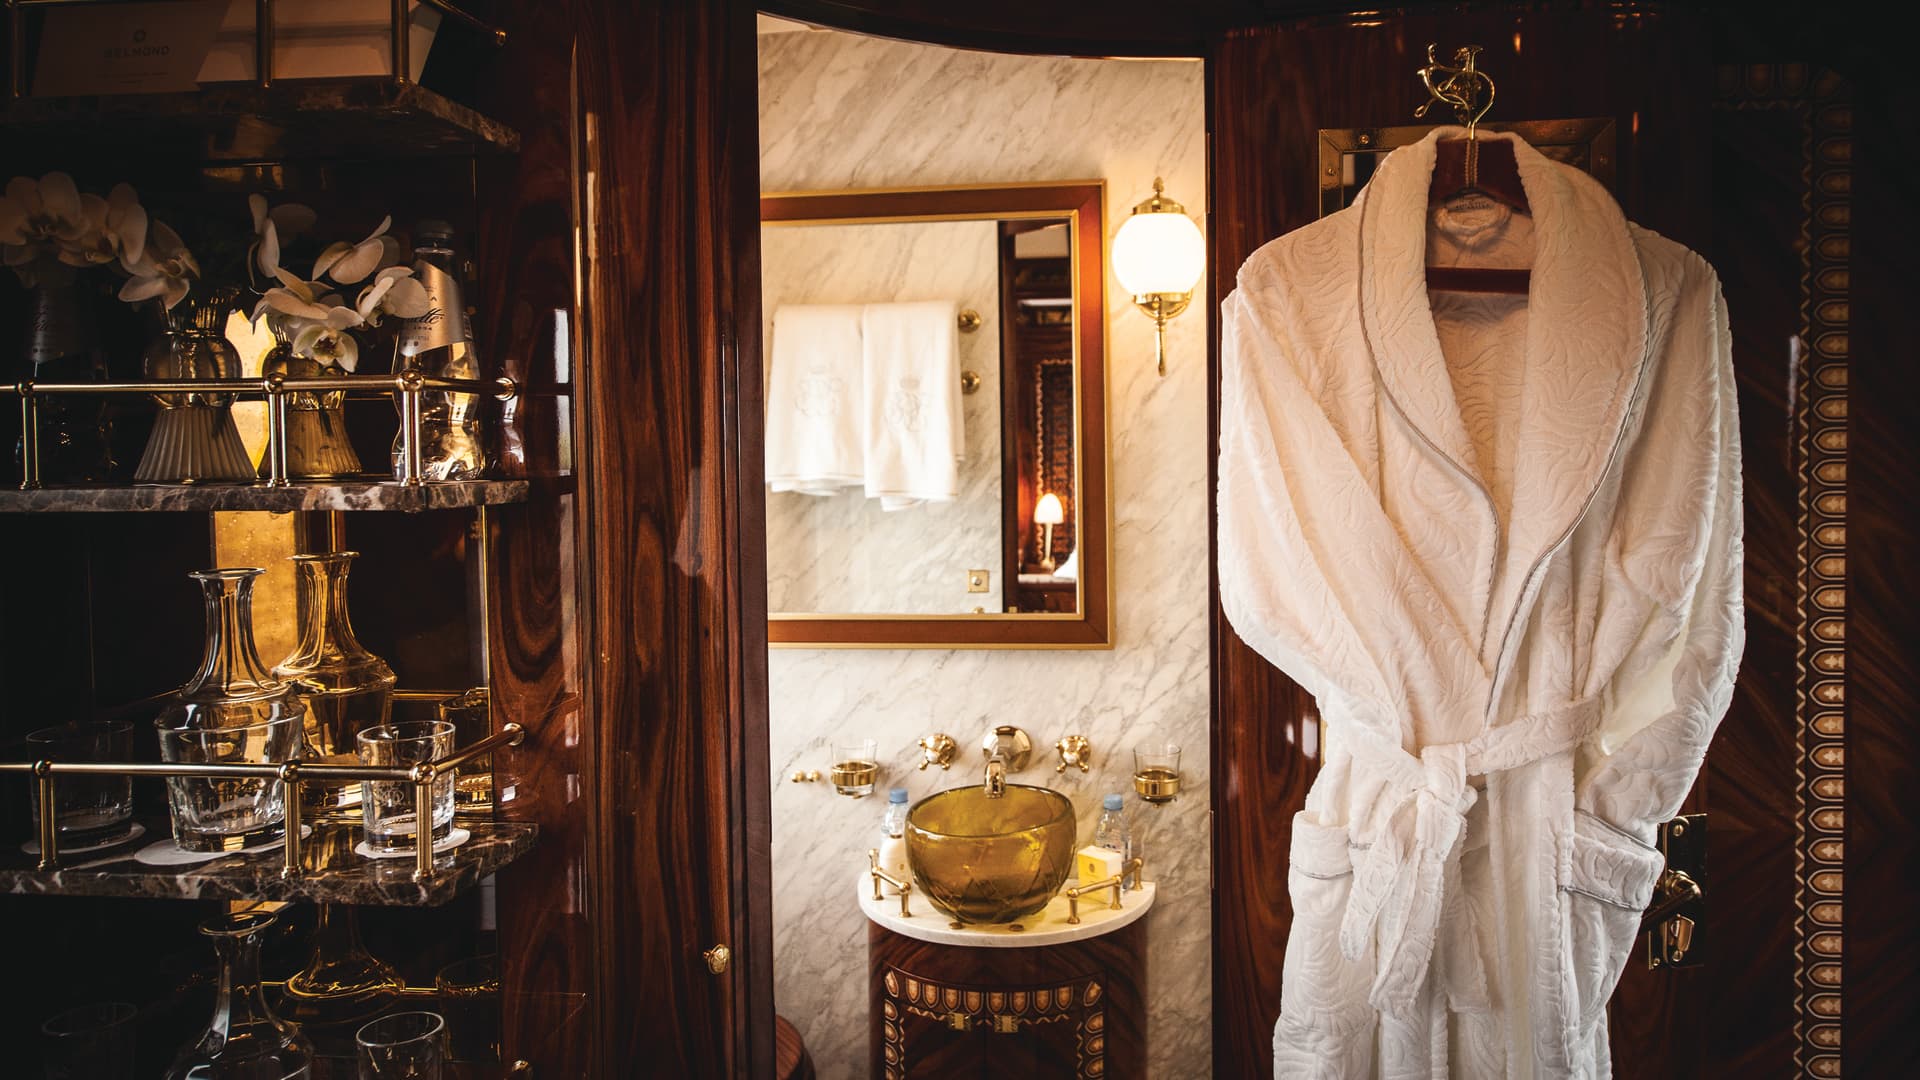 The ensuite bathroom in the Venice Simplon-Orient-Express' Budapest Suite.